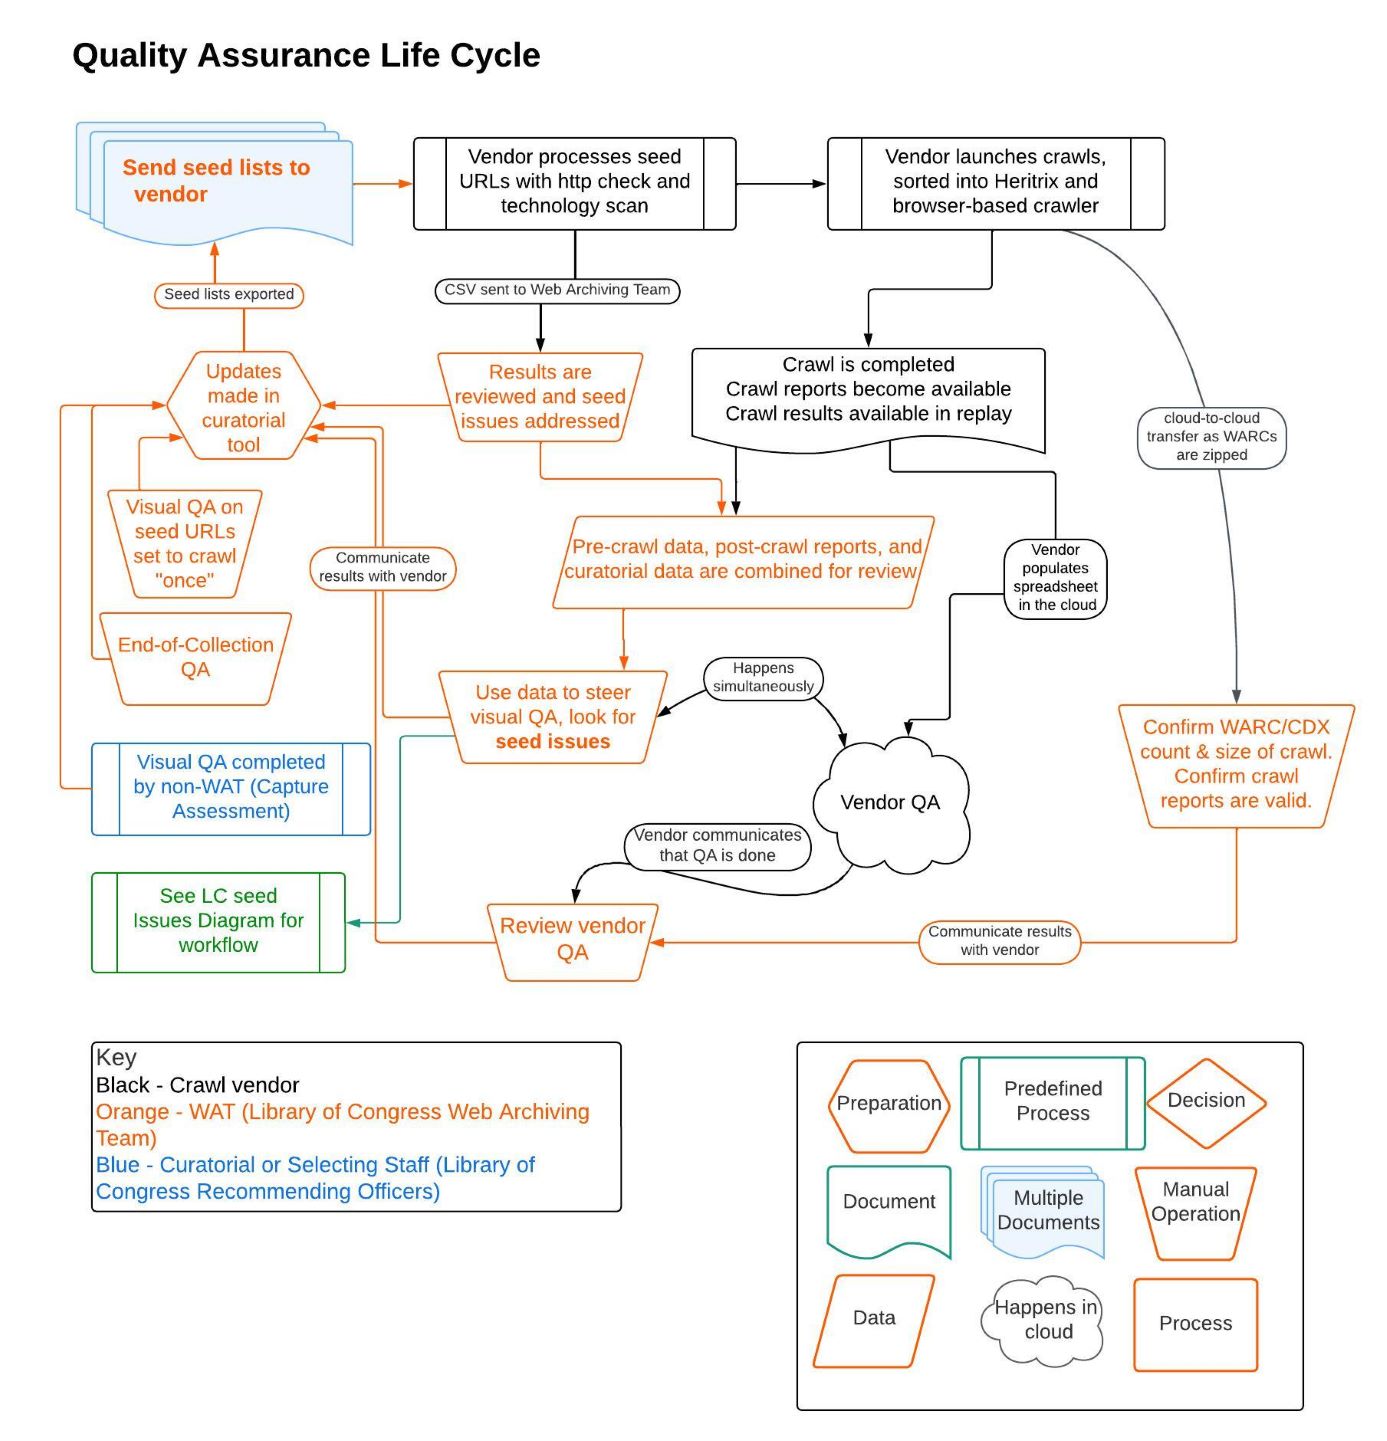 Quality Assurance Life Cycle at Library of Congress as of March, 25 2023.